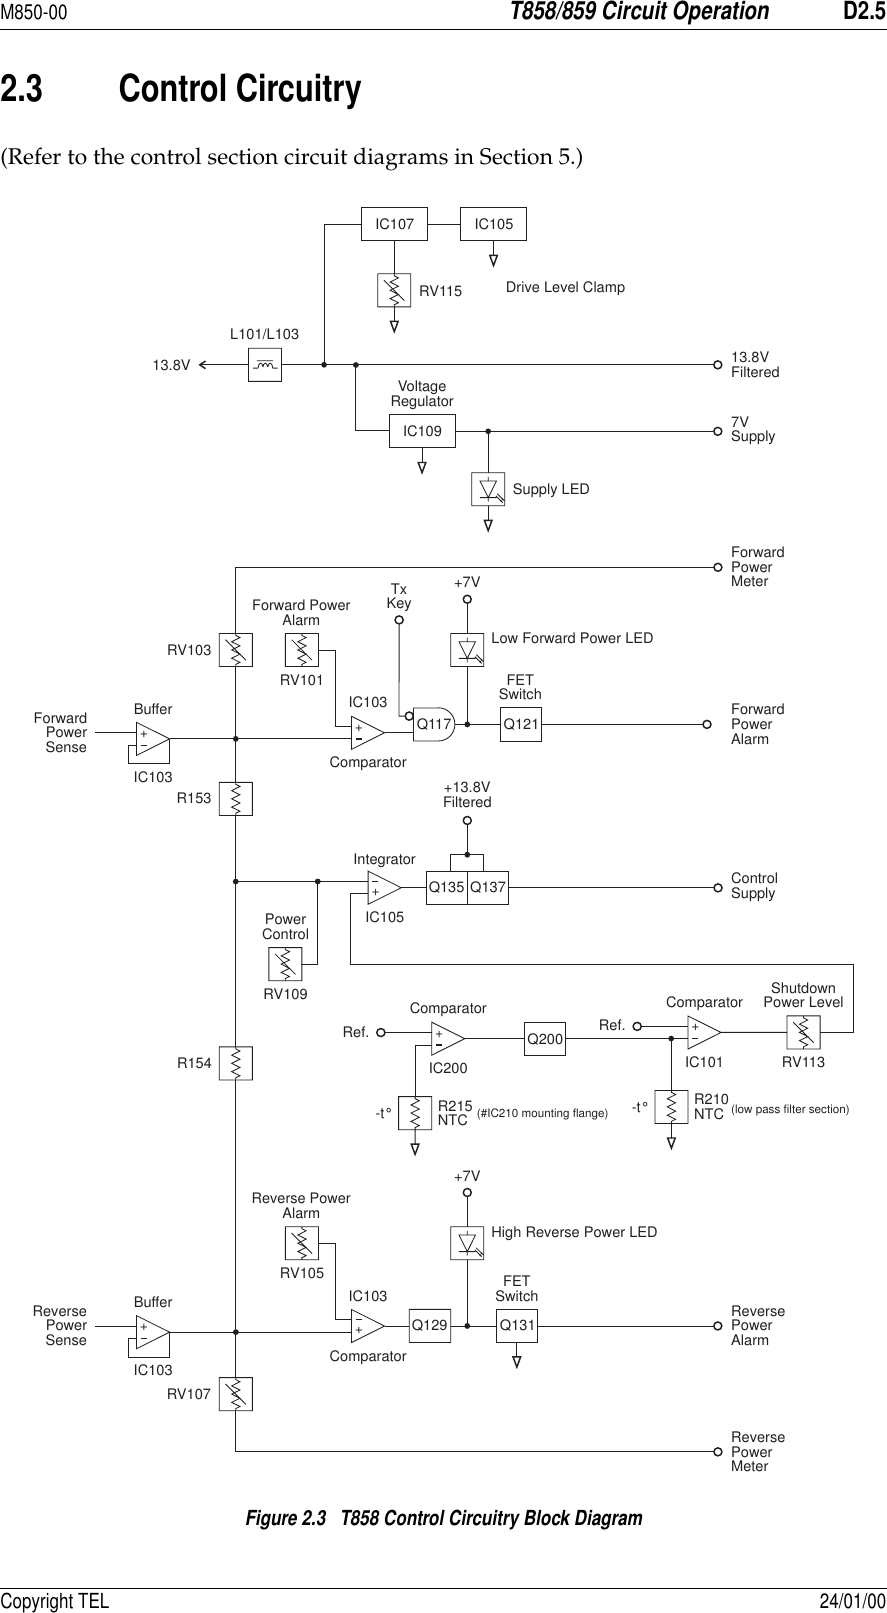 M850-00T858/859 Circuit OperationD2.5Copyright TEL 24/01/002.3 Control Circuitry(Refer to the control section circuit diagrams in Section 5.)Figure 2.3   T858 Control Circuitry Block DiagramRV115IC107 IC105Drive Level Clamp+Q200-t° R215NTCShutdownPower LevelComparatorIC200 RV113Ref. +-t° R210NTCComparatorIC101Ref.(#IC210 mounting flange) (low pass filter section)+ComparatorQ129 Q131FETSwitch+++ComparatorFETSwitchQ117IC103RV105High Reverse Power LEDLow Forward Power LEDReversePowerMeterReversePowerAlarmForwardPowerMeterForwardPowerAlarm+7V+7VTxKeyIC103RV101RV103+Q137Q135Q121+13.8VFilteredIntegratorIC105ControlSupplyRV109PowerControlR154RV107R153ReversePowerSenseBufferIC103BufferIC103ForwardPowerSense7VSupply13.8VFilteredL101/L10313.8VSupply LEDIC109VoltageRegulatorForward PowerAlarmReverse PowerAlarm